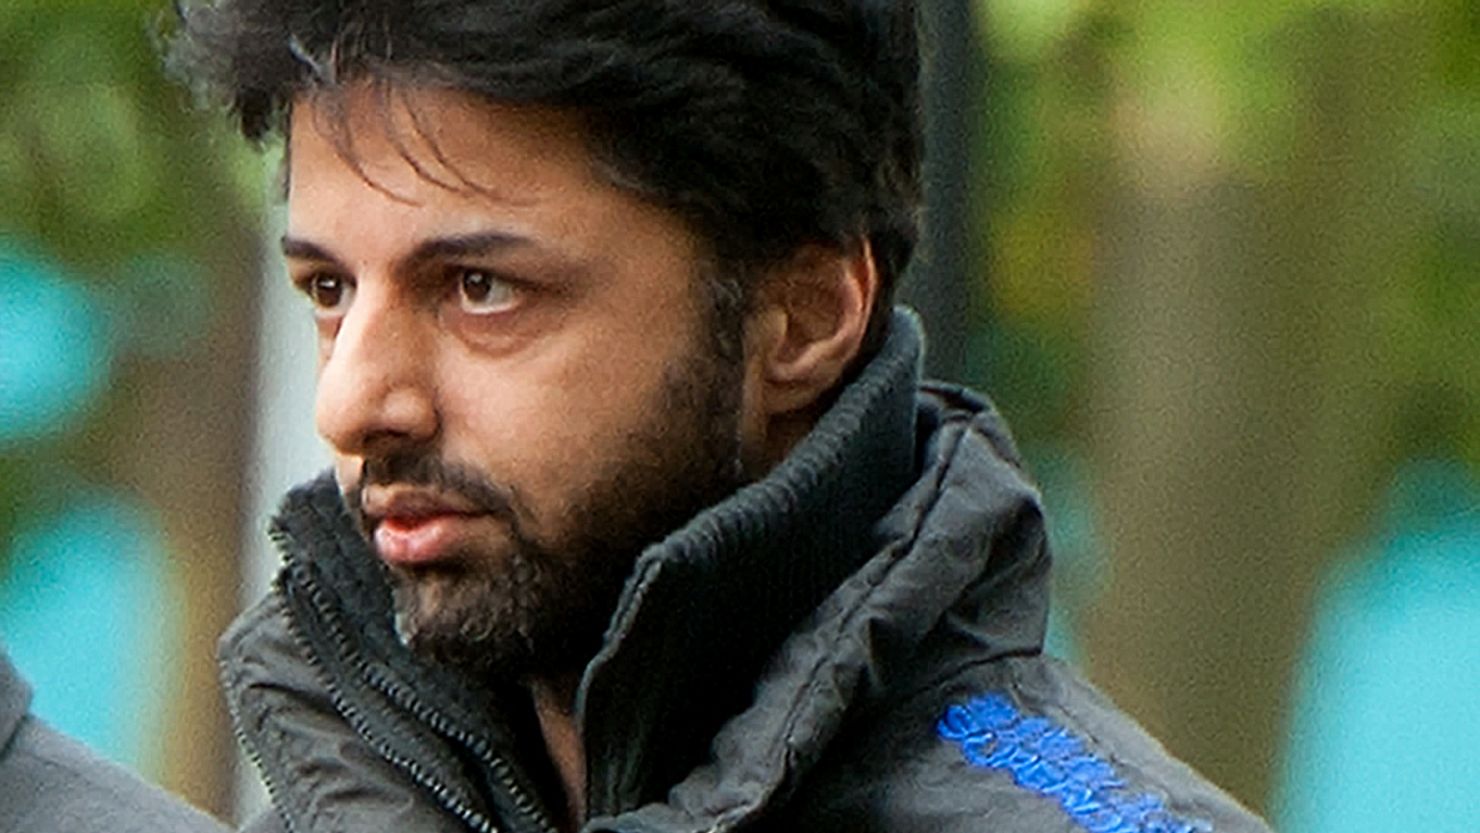 Shrien Dewani is accused of hiring hitmen to kill his wife during the couple's honeymooon in South Africa, last November.